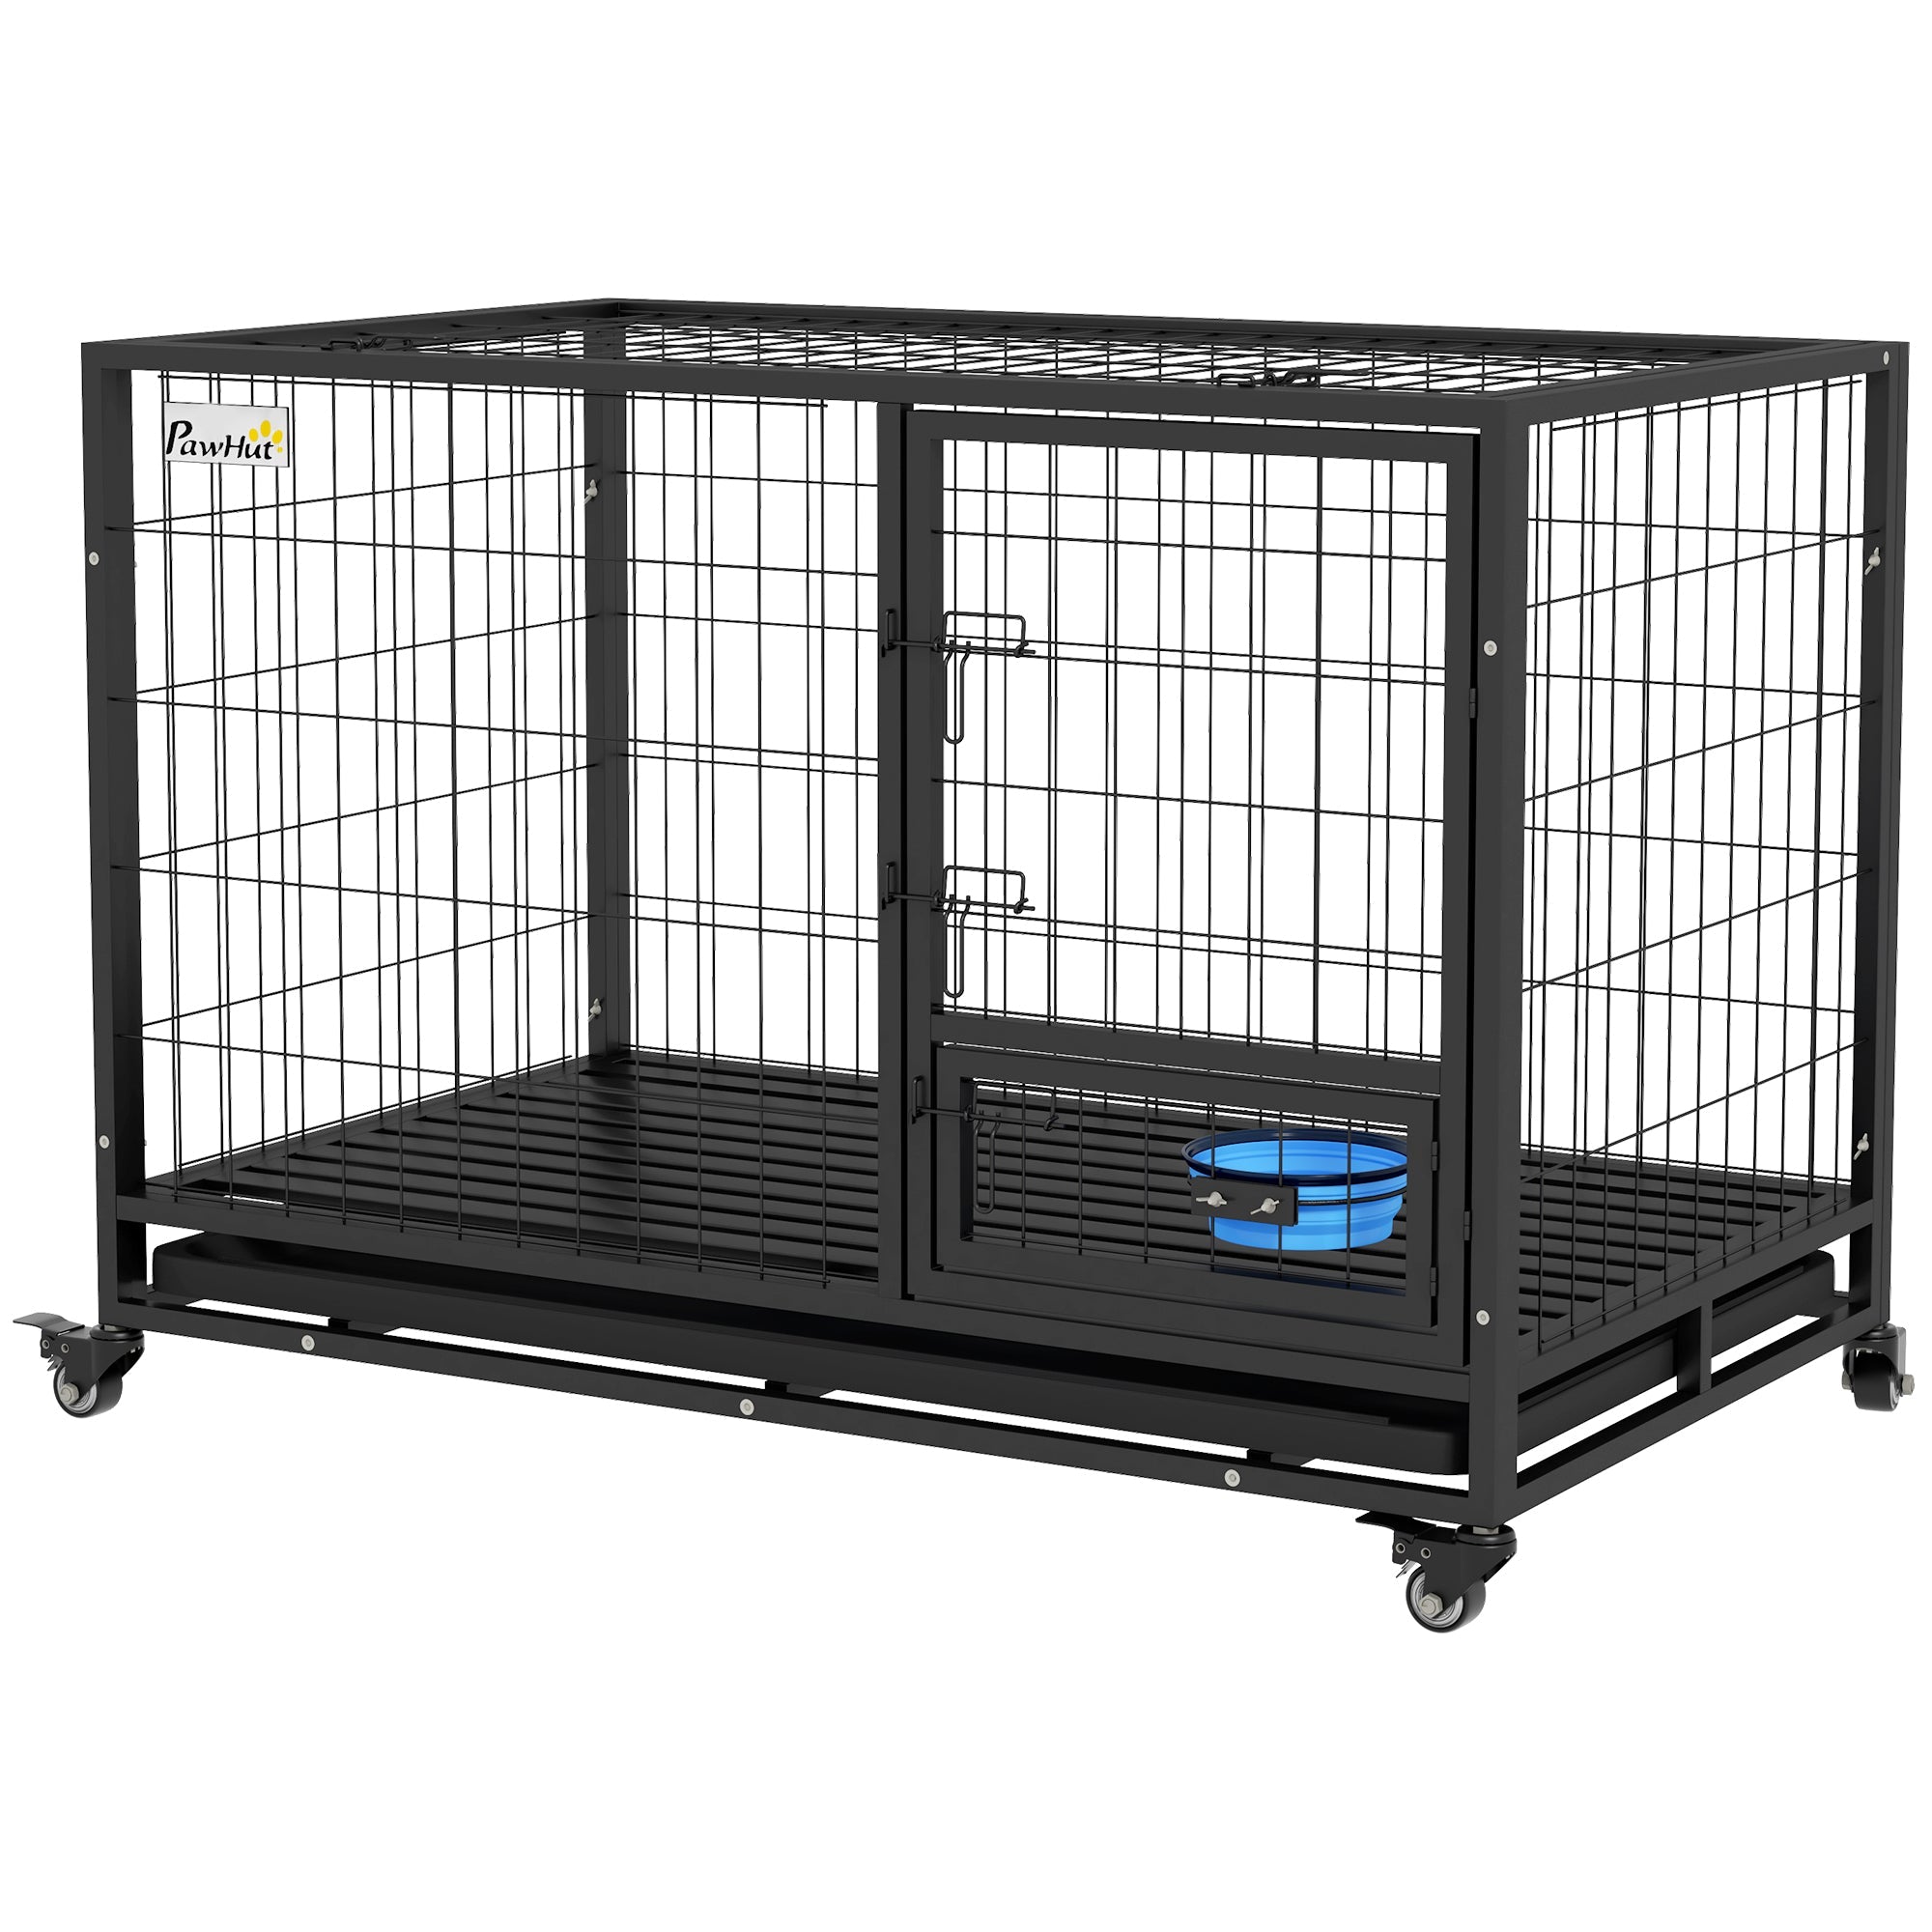 48" Heavy Duty Dog Crate on Wheels w/ Bowl Holder, Removable Tray, Detachable Top, Double Doors for L, XL Dogs-0